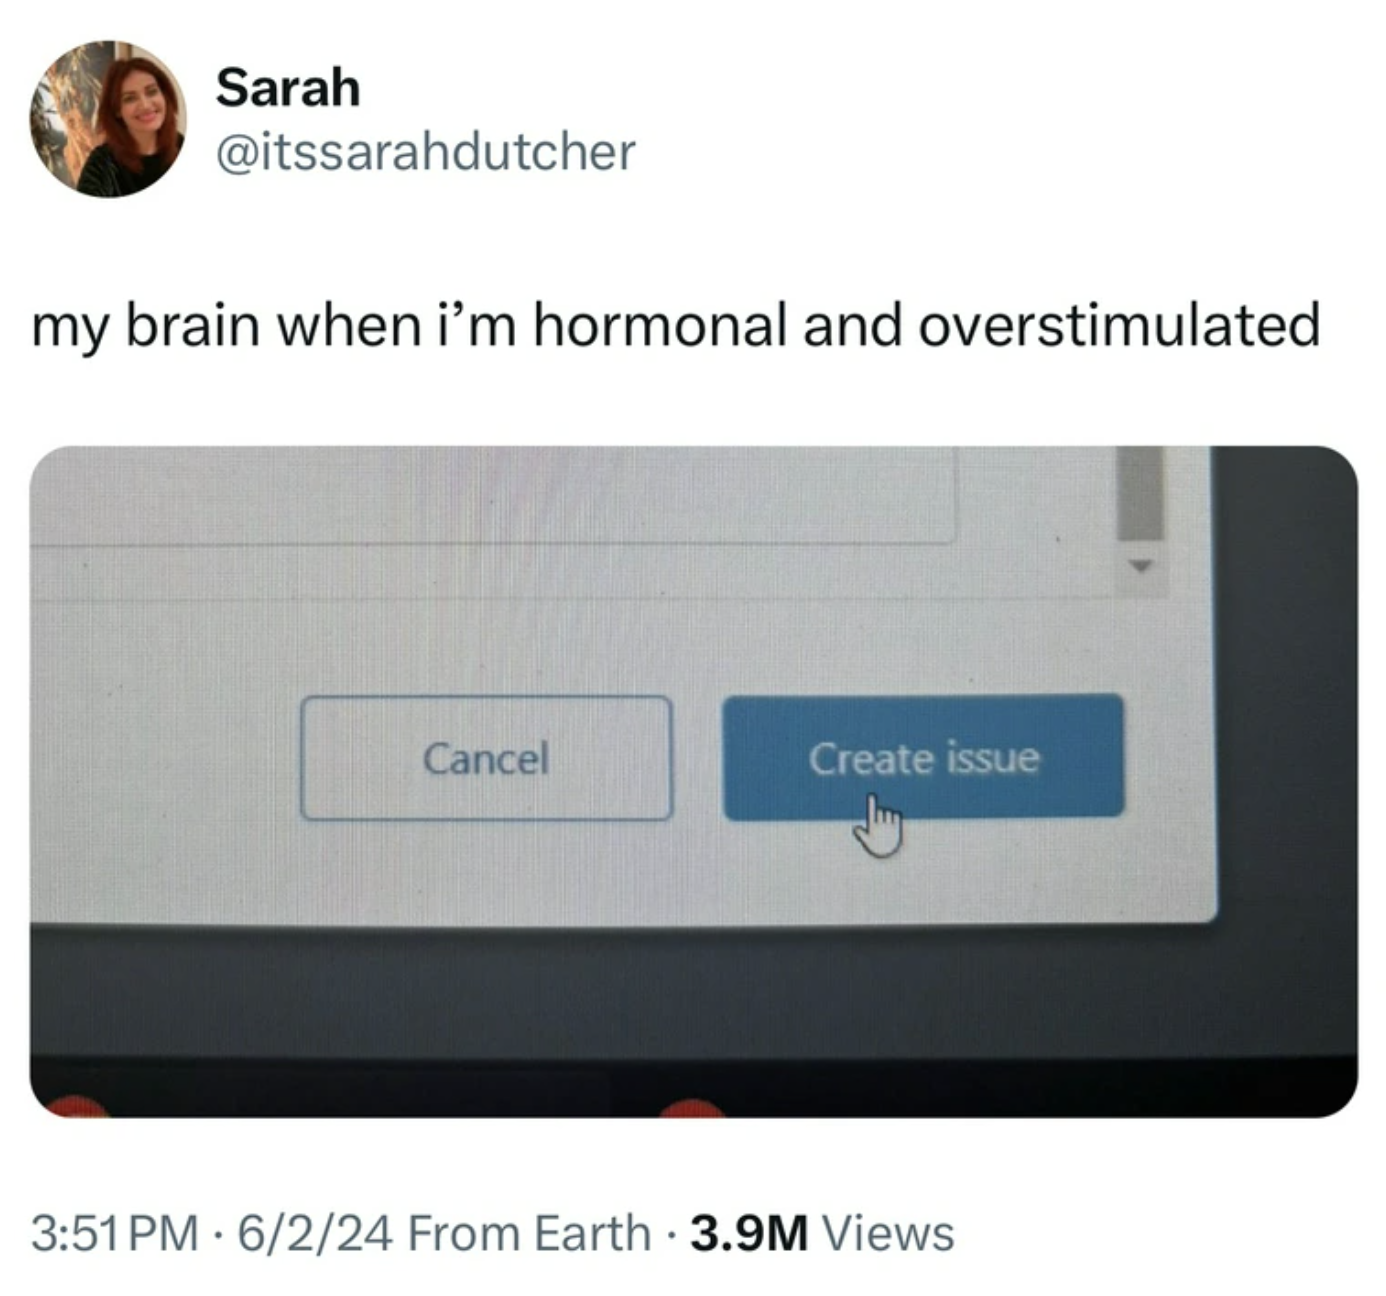 diagram - Sarah my brain when i'm hormonal and overstimulated Cancel Create issue 6224 From Earth 3.9M Views